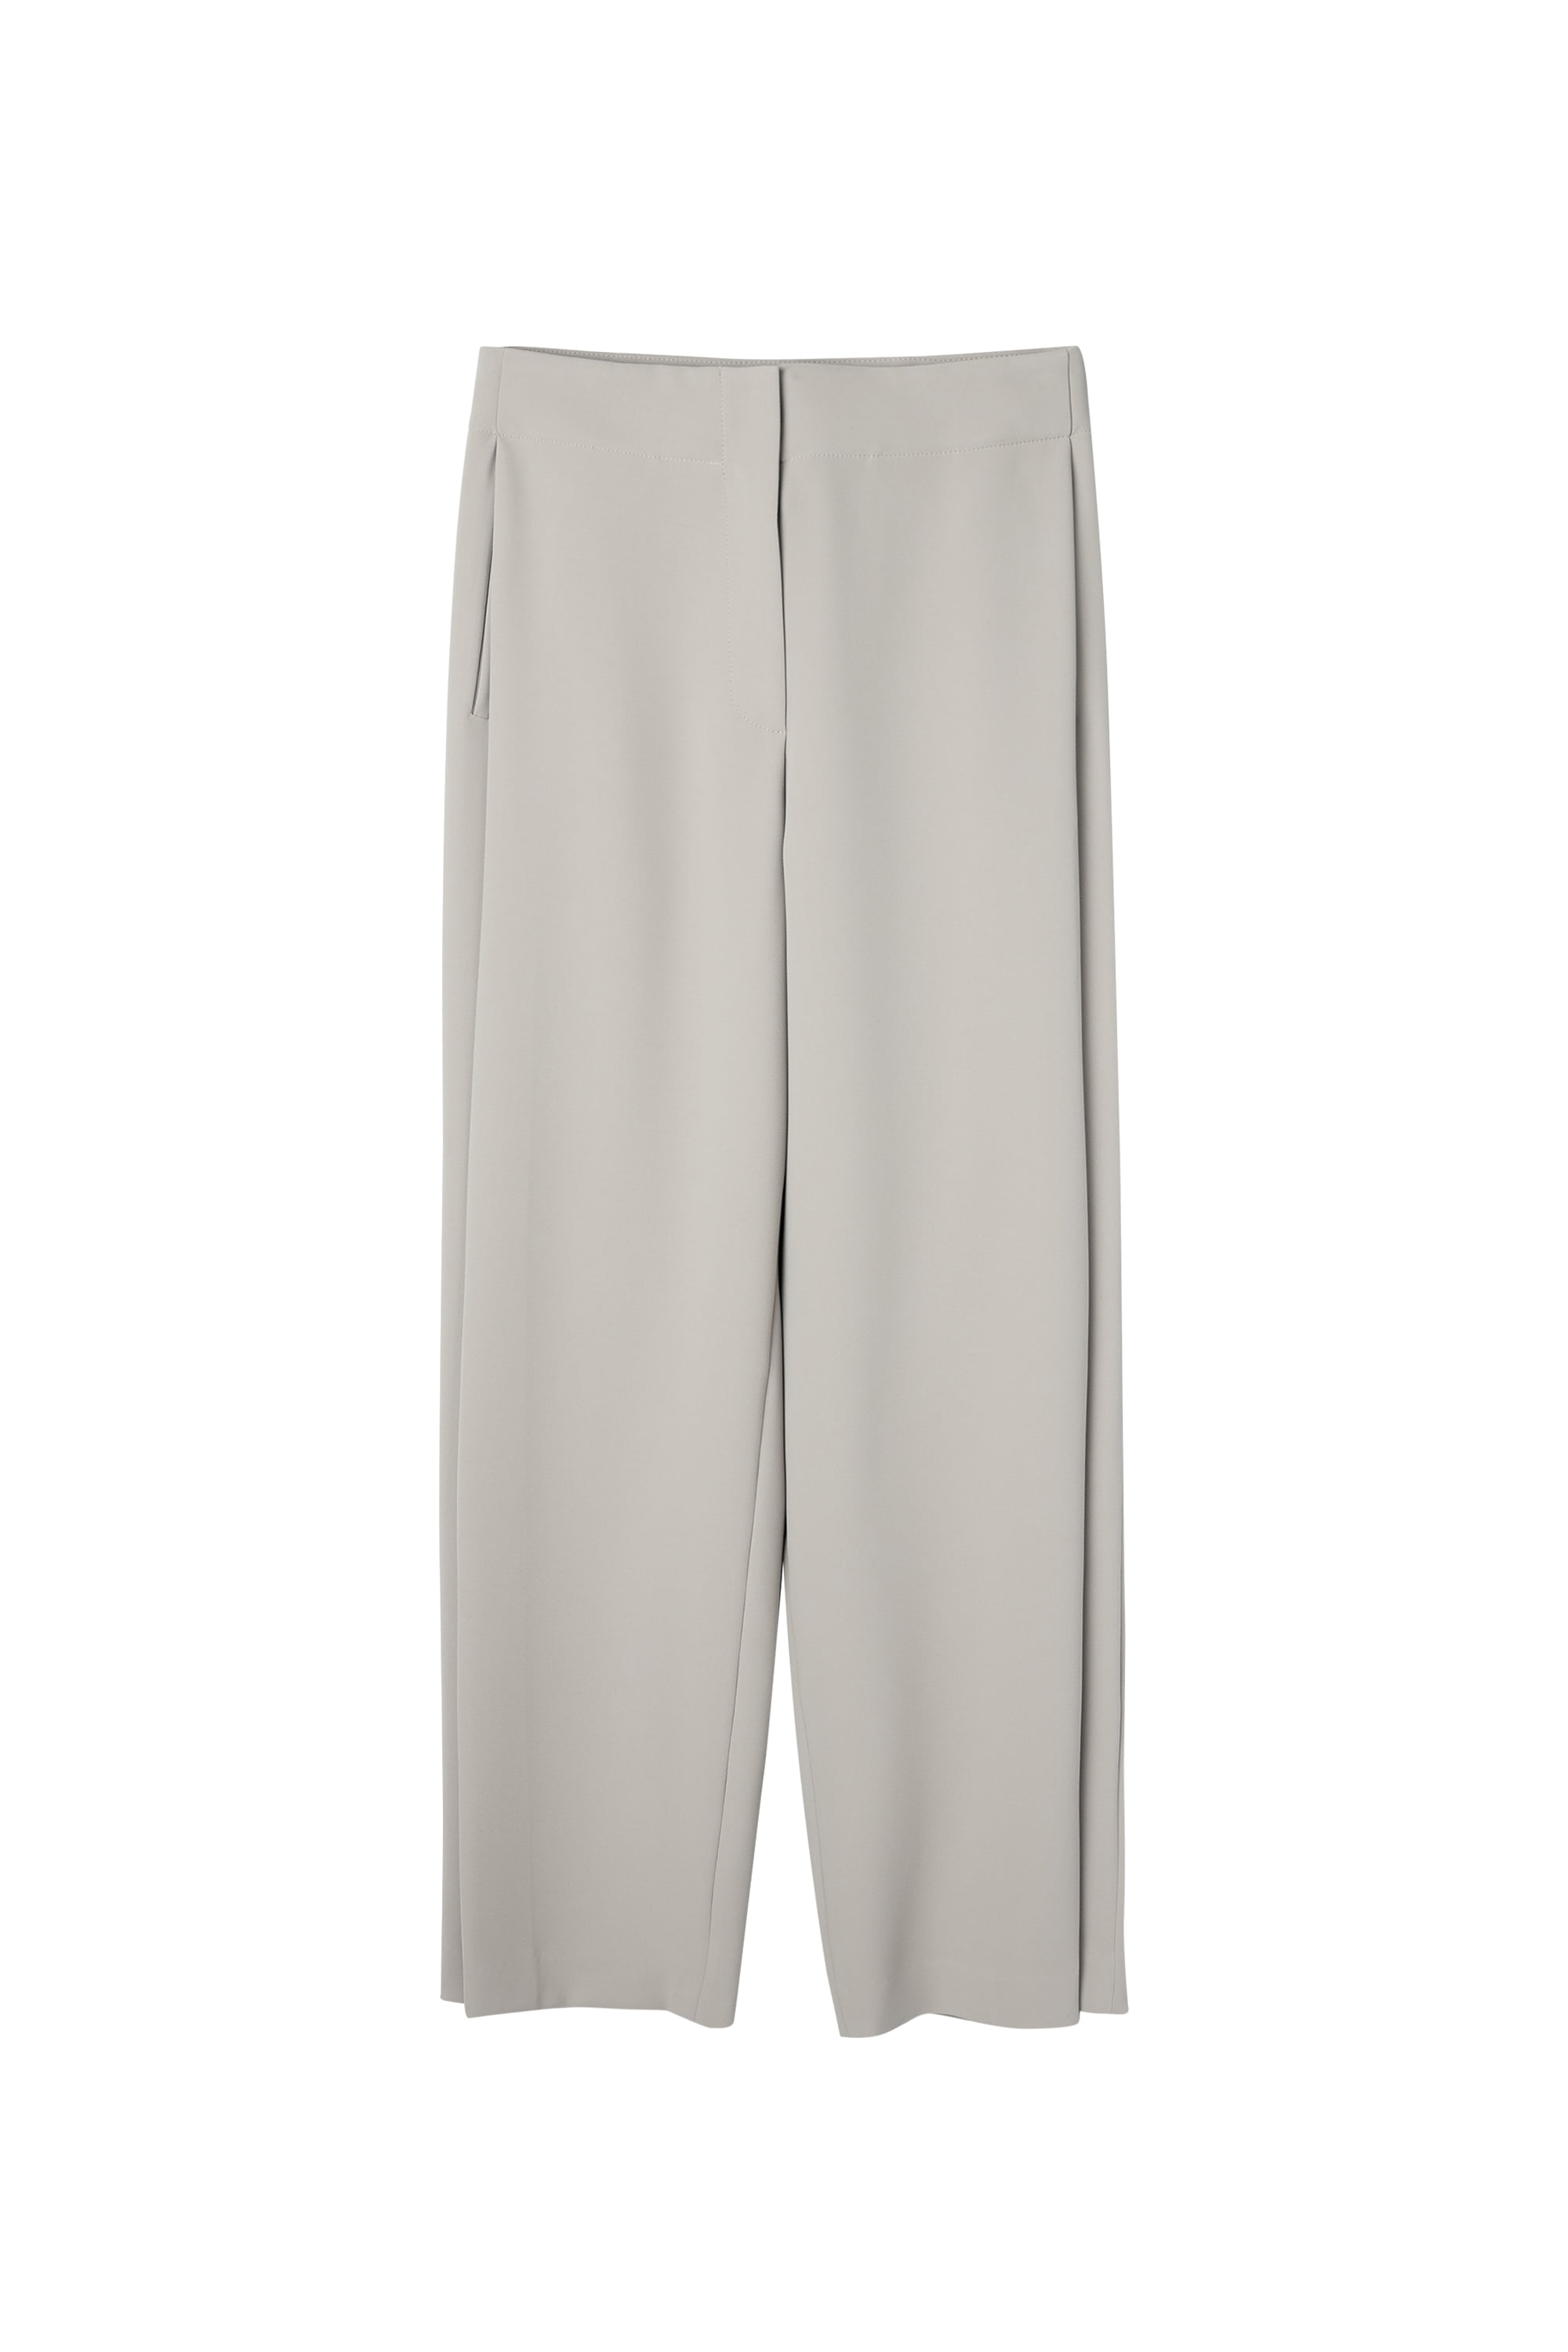 DRESSY SINGLE TUCK TROUSERS (3 COLORS)